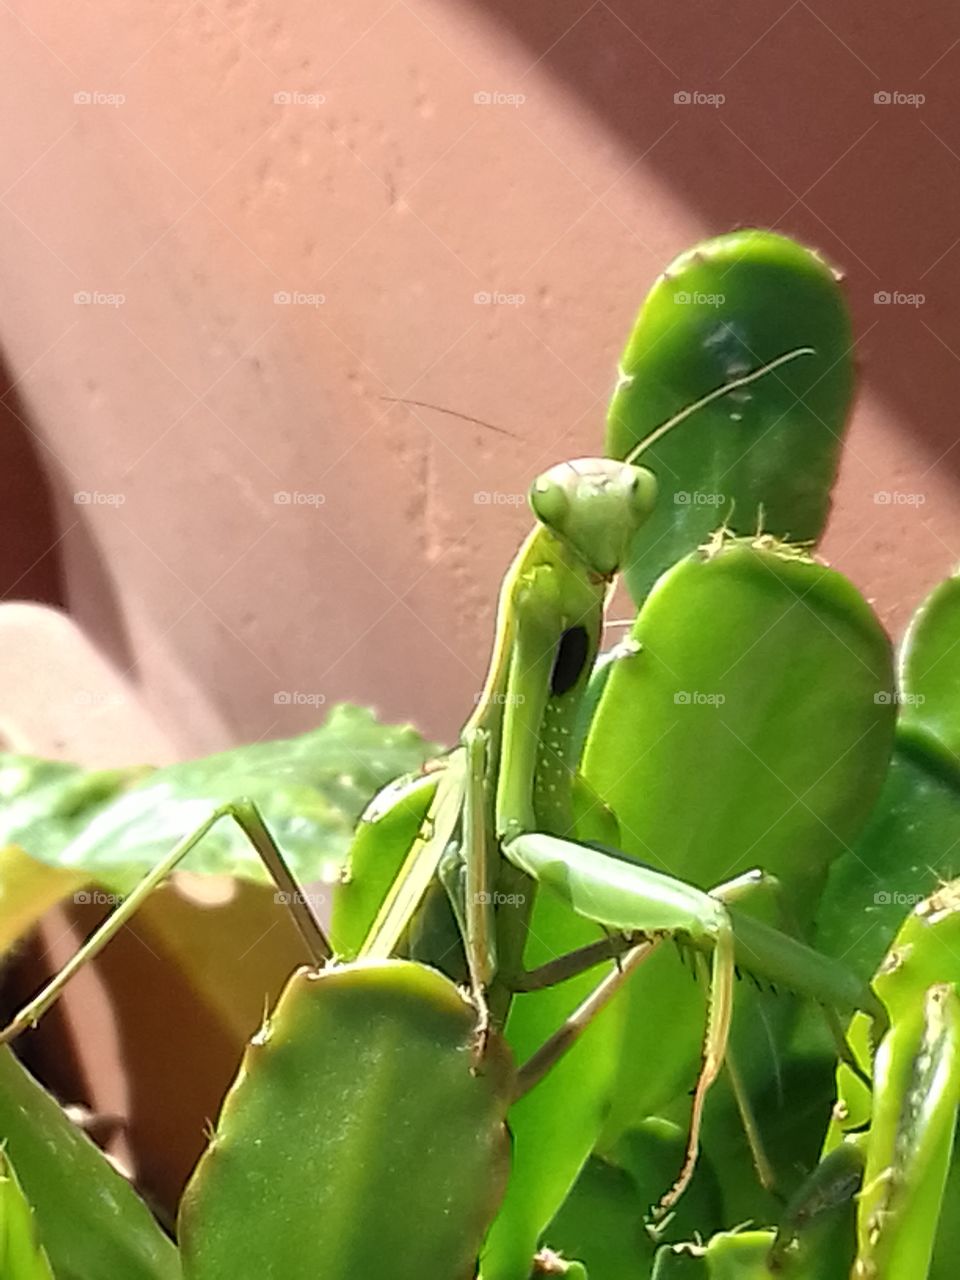 praying mantis...she's holding for a picture!